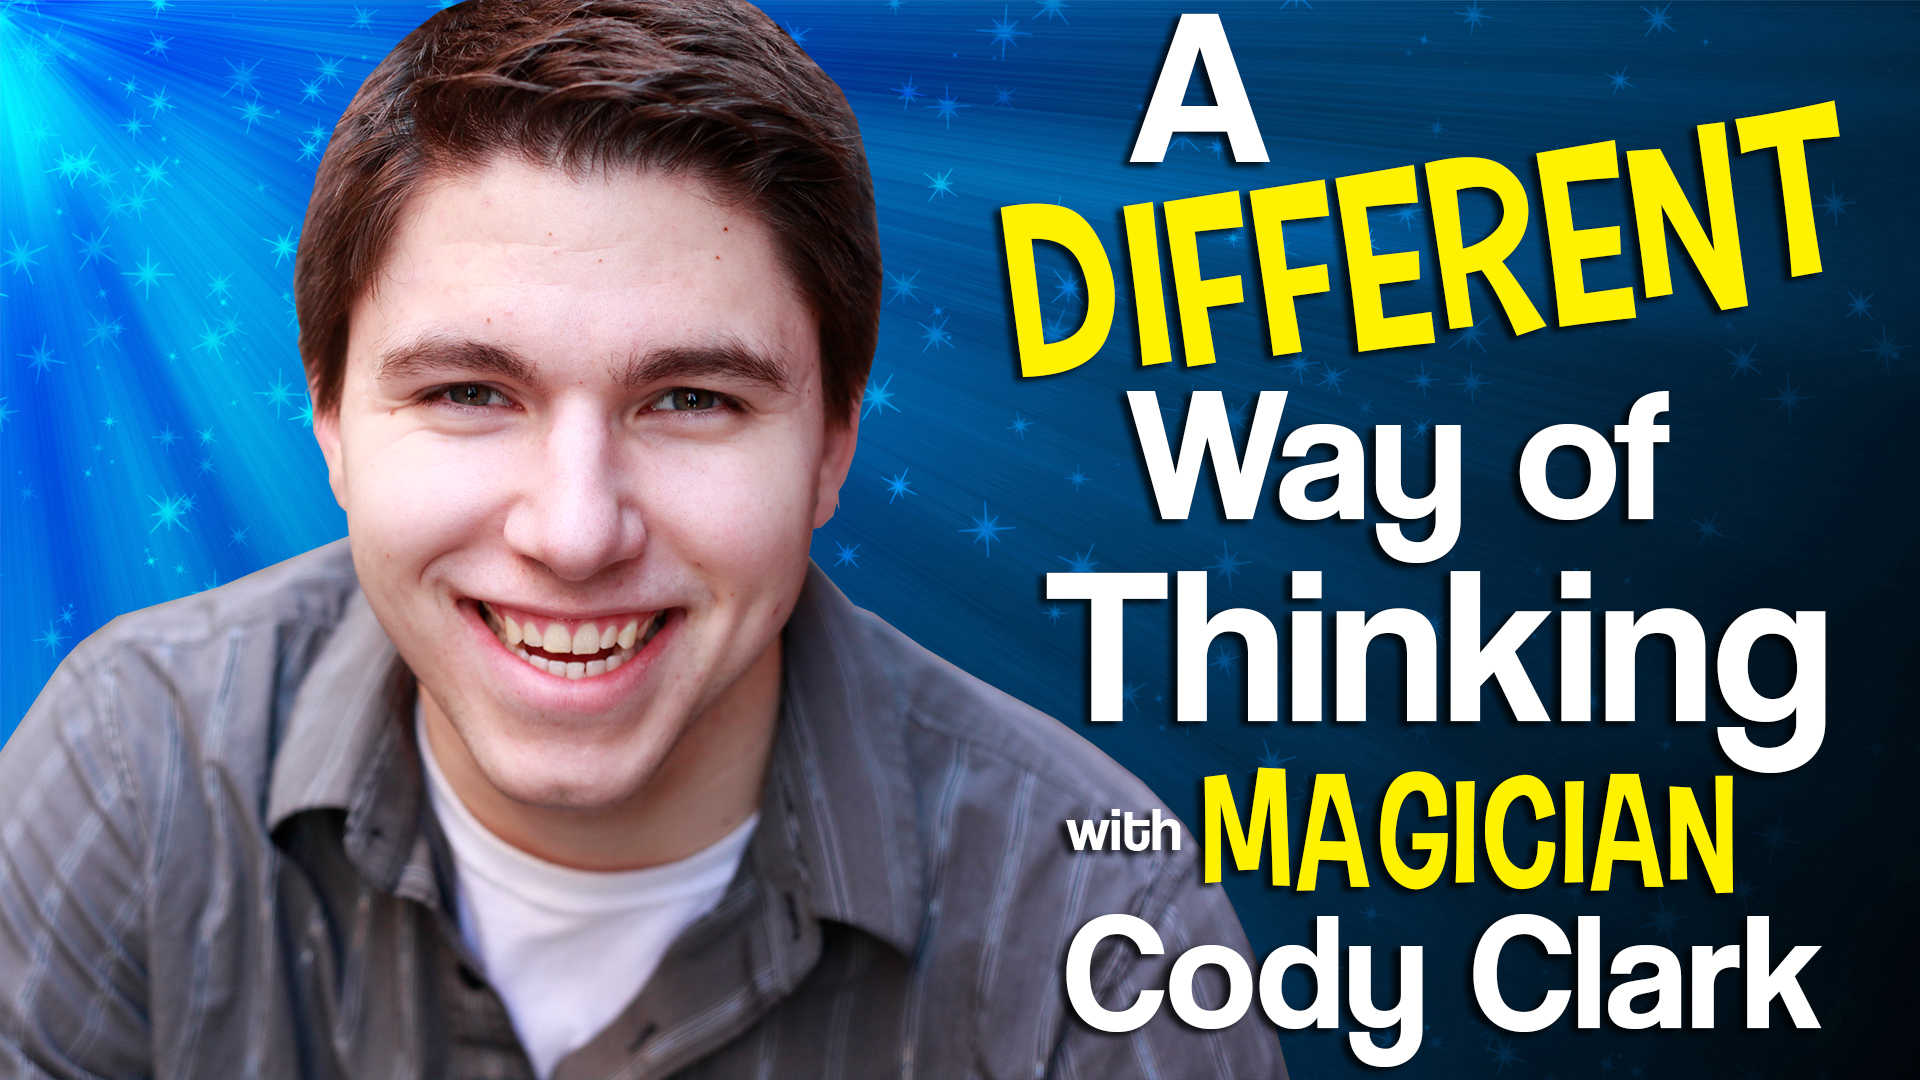 Image reads "A Different Way of Thinking with Magician Cody Clark" against a spotlight background. A picture of Cody Clark is to the left of the title. 